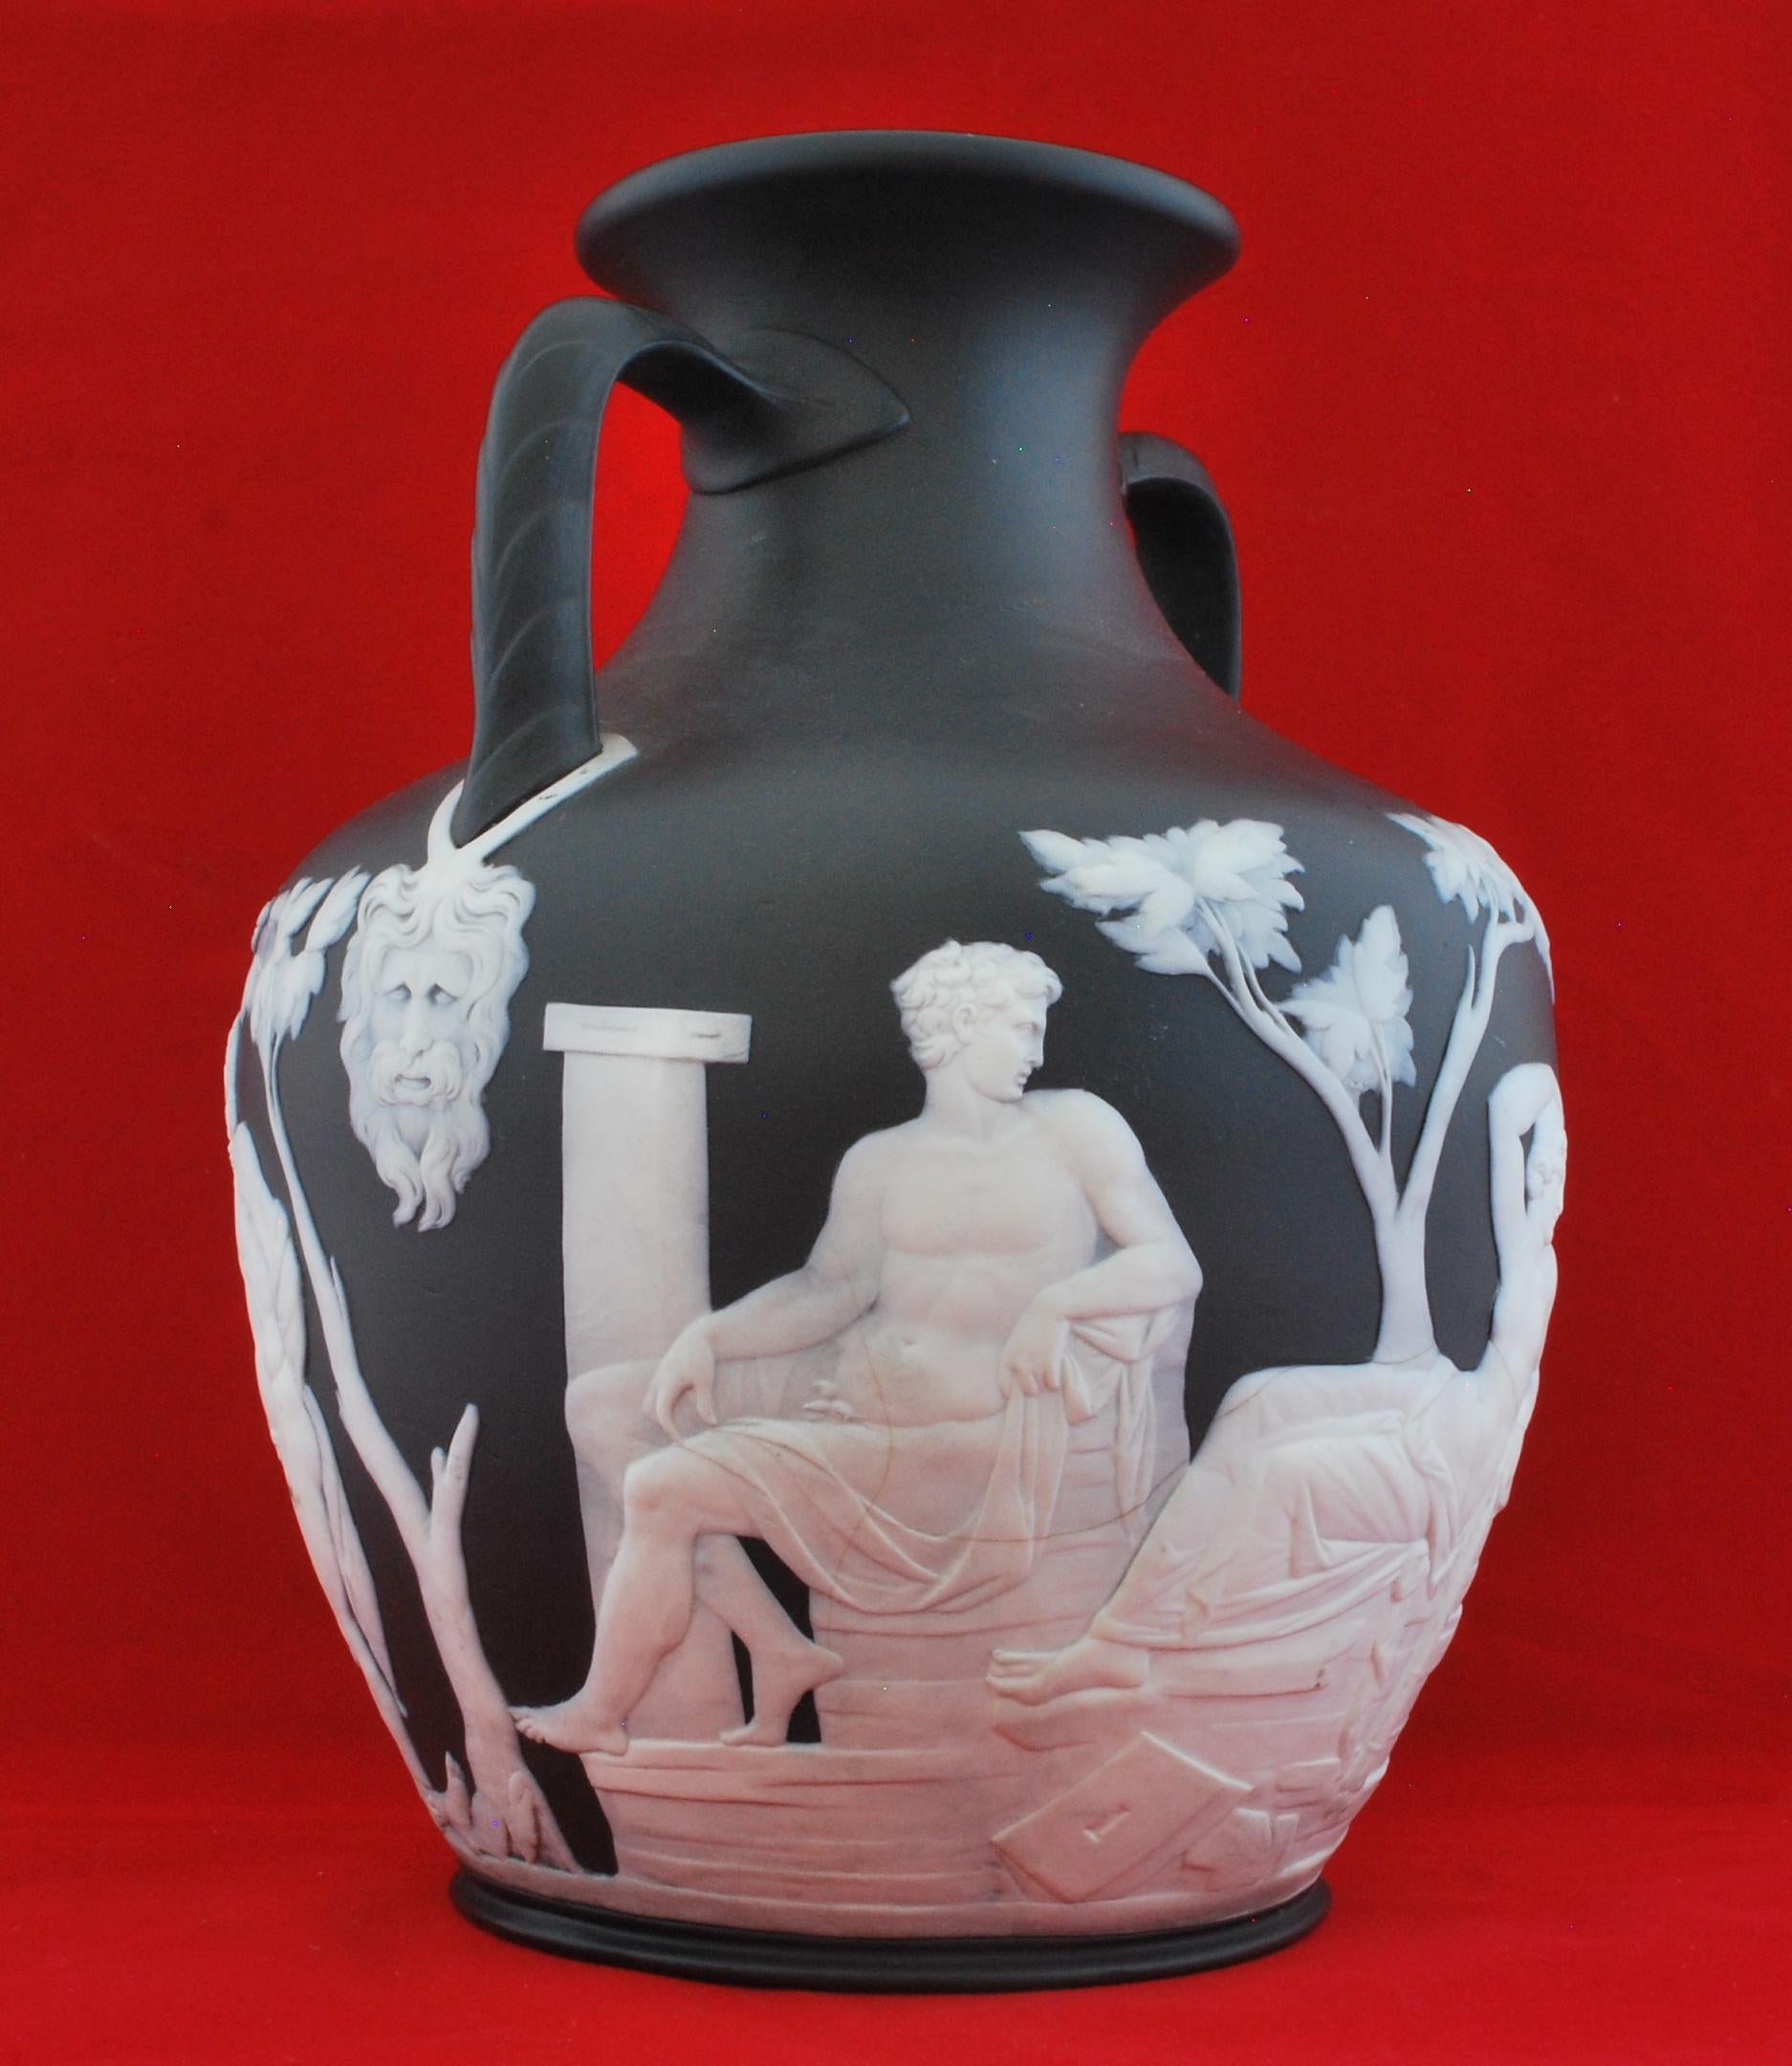 A full sized Portland vase in solid black jasper. This is the 'undraped' version, meaning it follows the original, rather than having draperies strategically placed.

A superb example, with really good translucence. There is a small loss to the